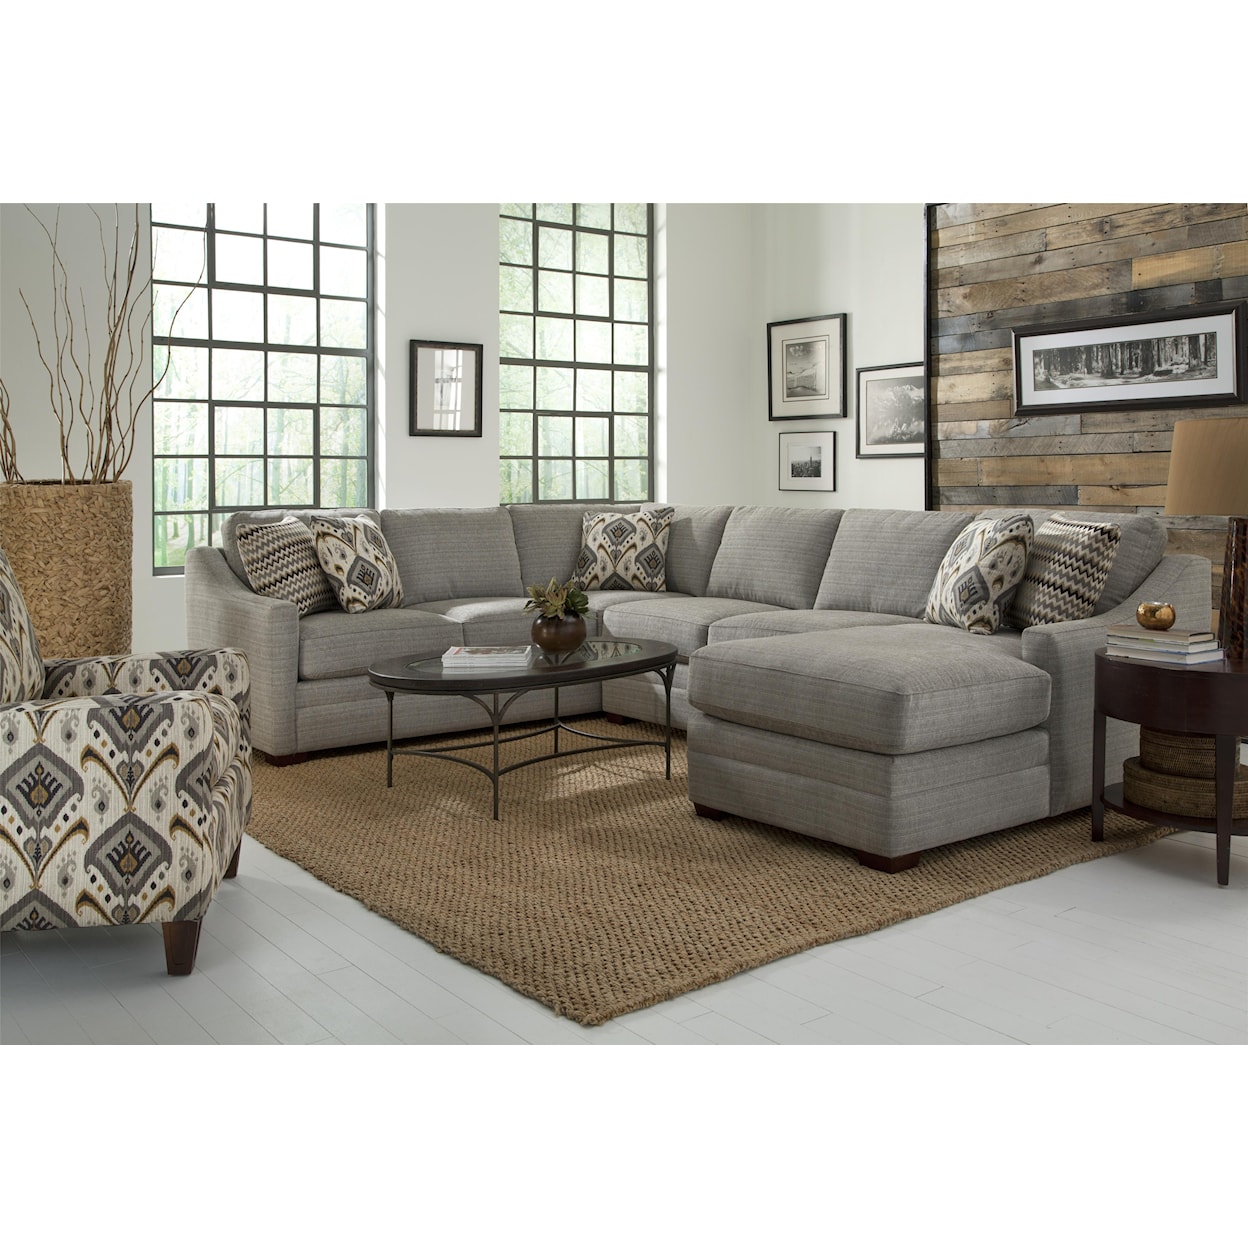 Hickory Craft F9 Series Customizable 4 Pc Sectional Sofa